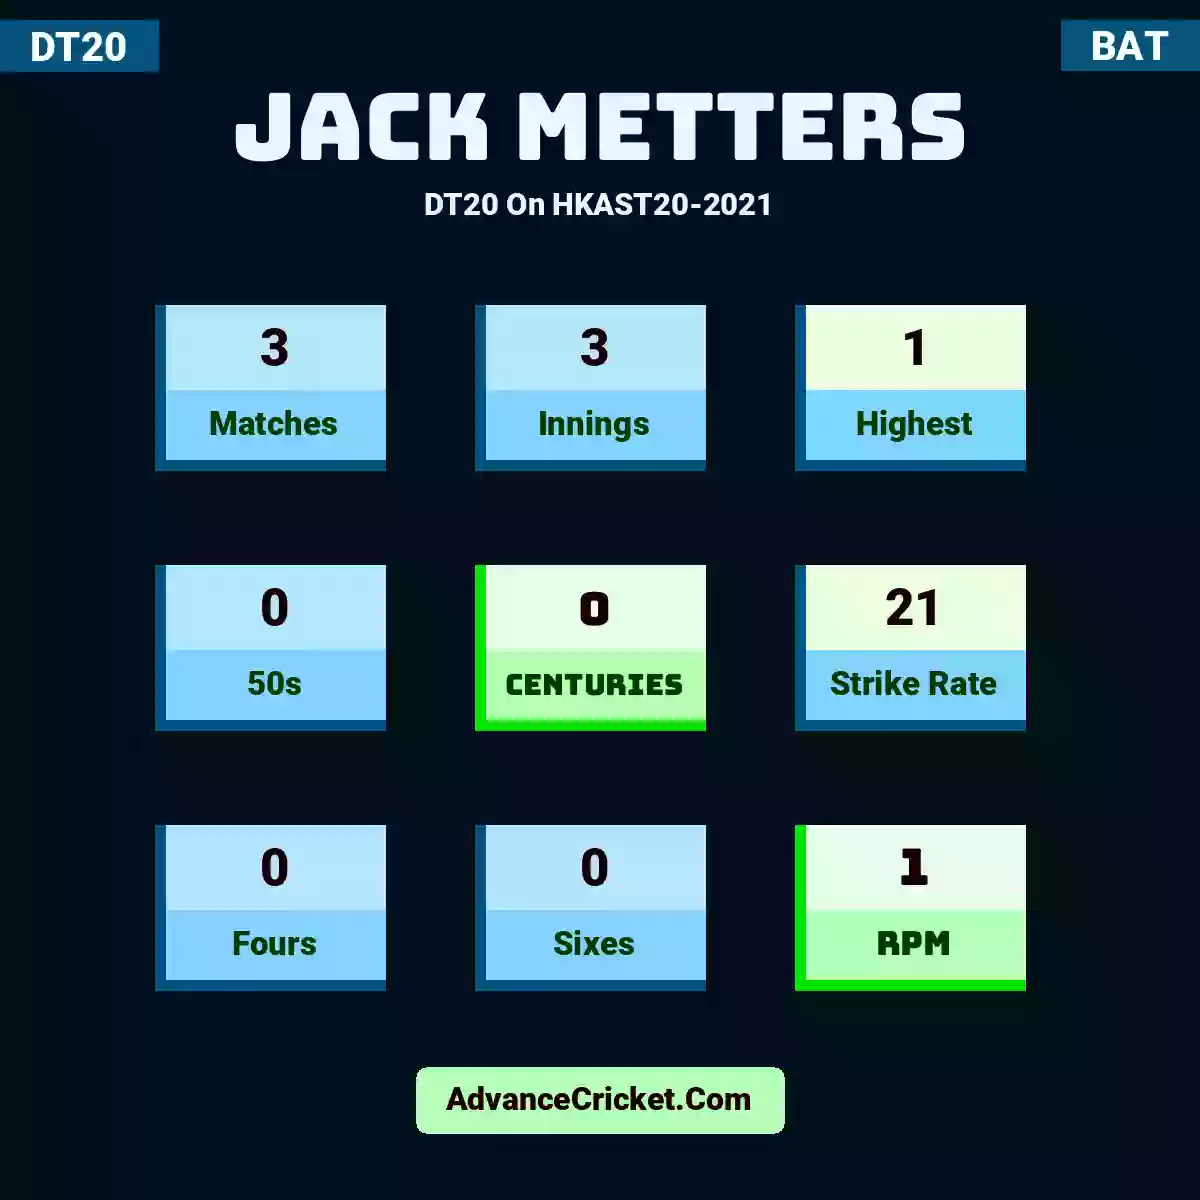 Jack Metters DT20  On HKAST20-2021, Jack Metters played 3 matches, scored 1 runs as highest, 0 half-centuries, and 0 centuries, with a strike rate of 21. J.Metters hit 0 fours and 0 sixes, with an RPM of 1.